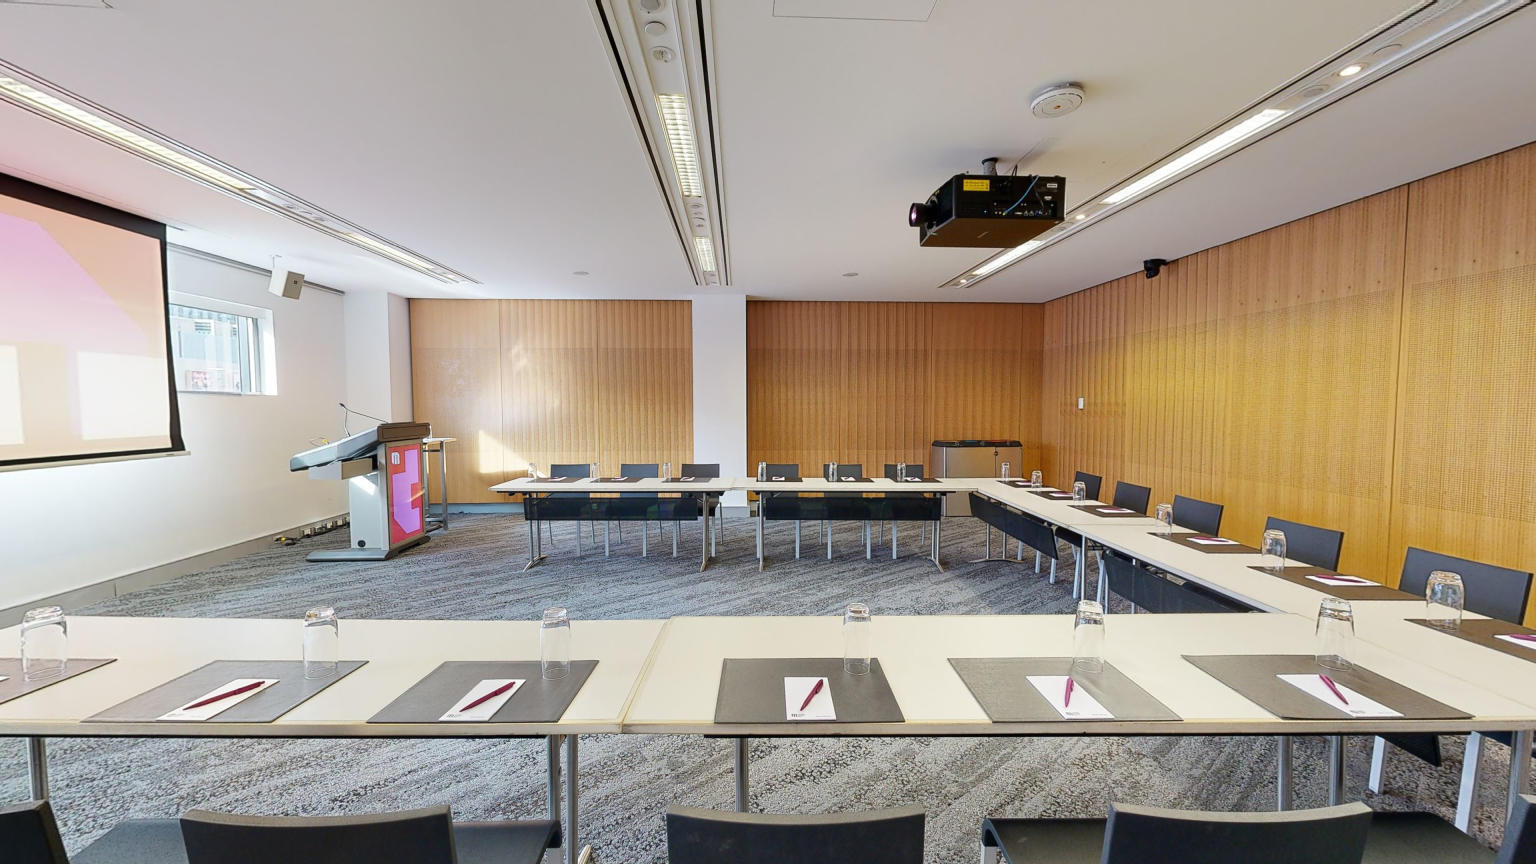 A meeting or conference room with tables and chairs arranged in a u-shaped boardroom configuration. The tables and chairs are facing a large projector screen and lectern both which have MCEC branding displayed on it. 